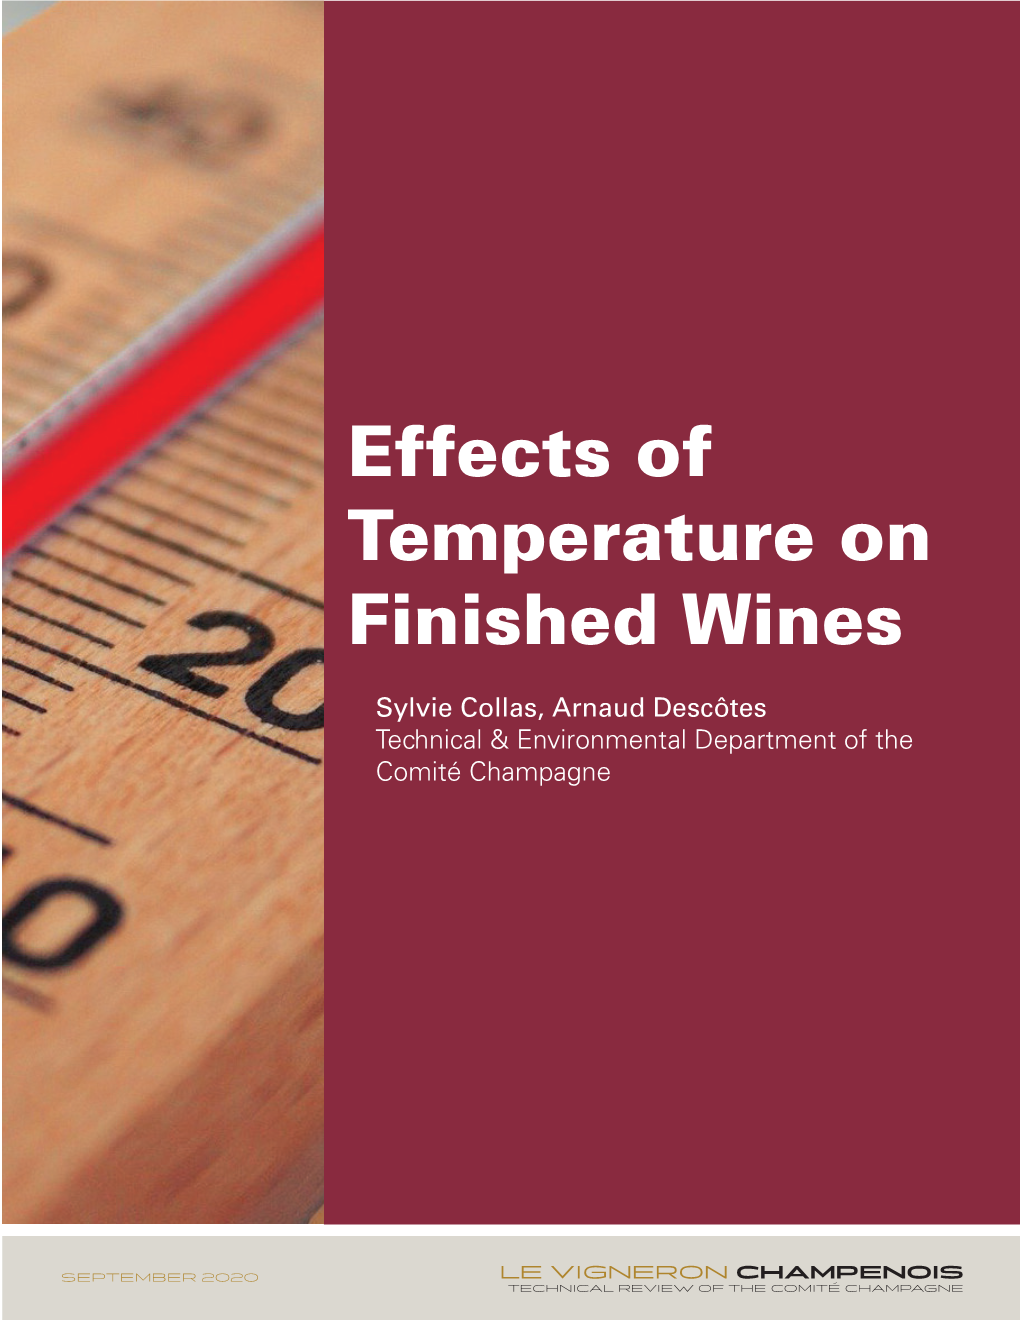 Effects of Temperature on Finished Wines